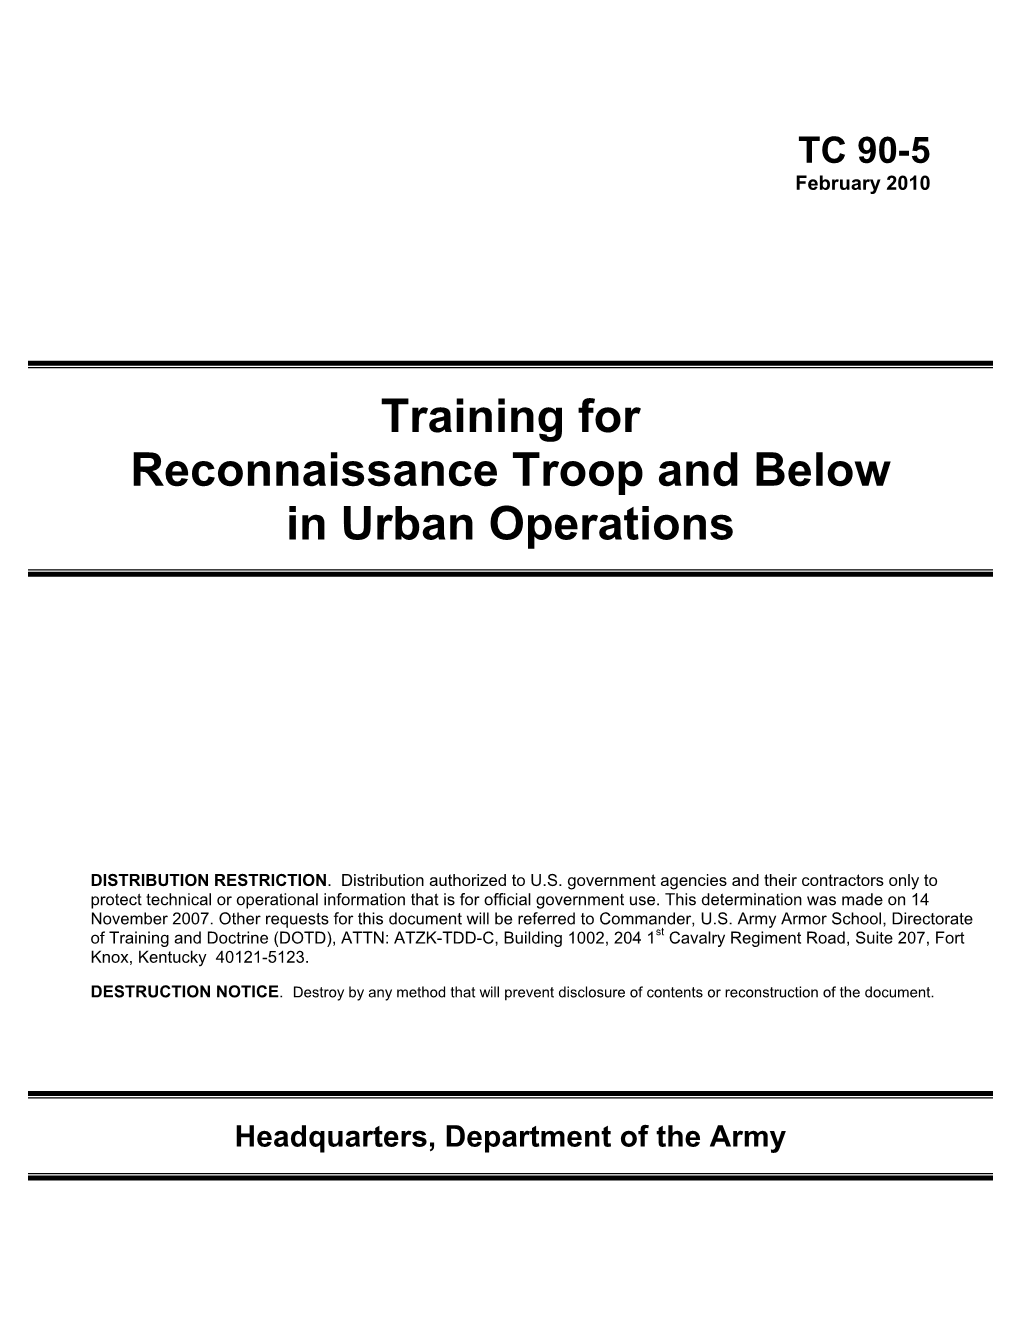 Training for Reconnaissance Troop and Below in Urban Operations